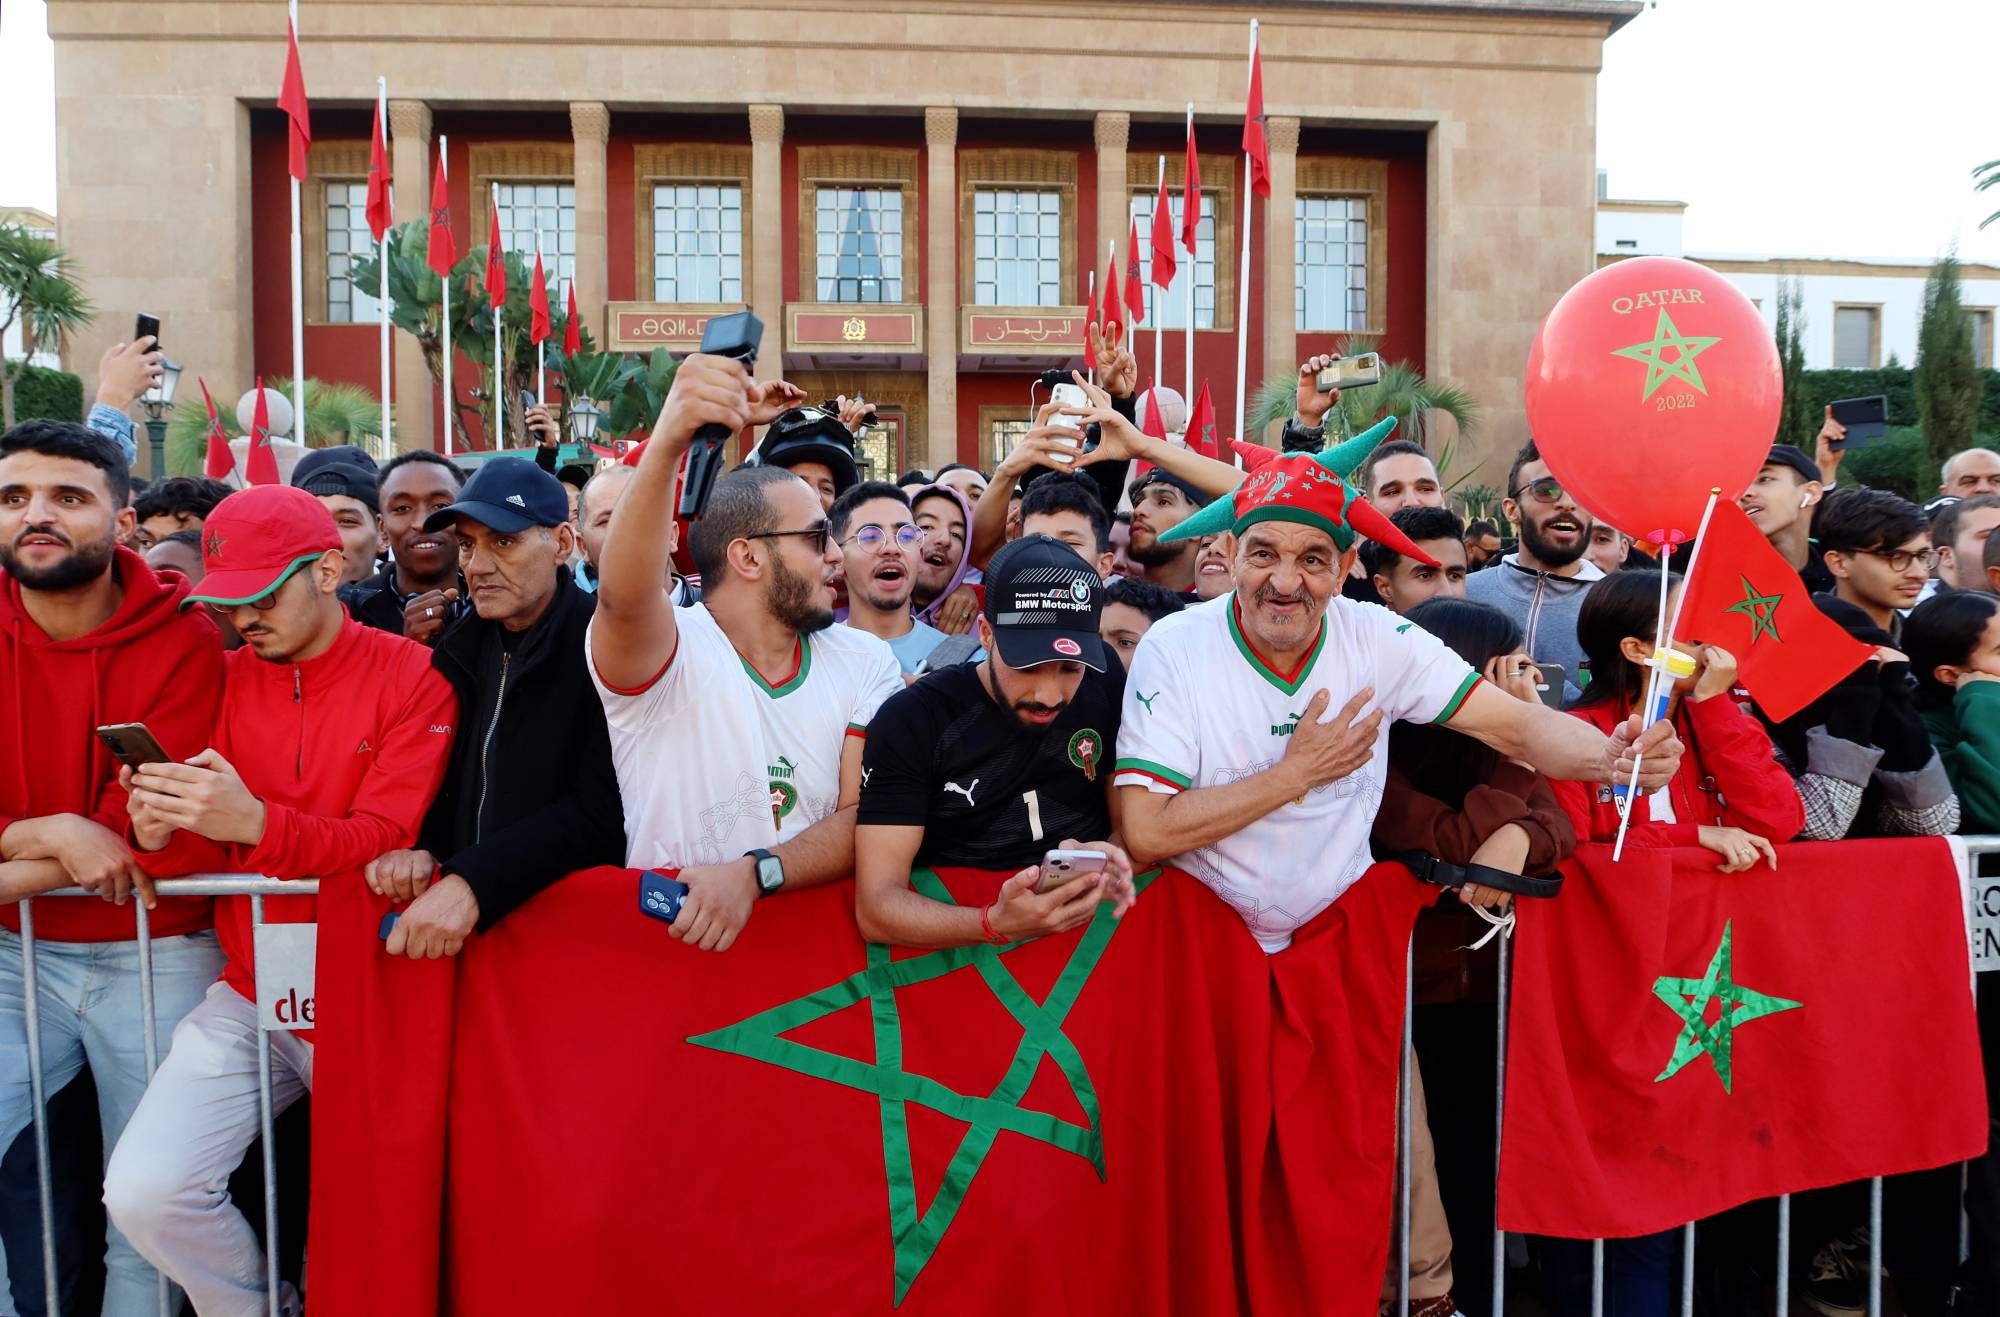 Morocco joins Portugal and Spain in transcontinental bid to host